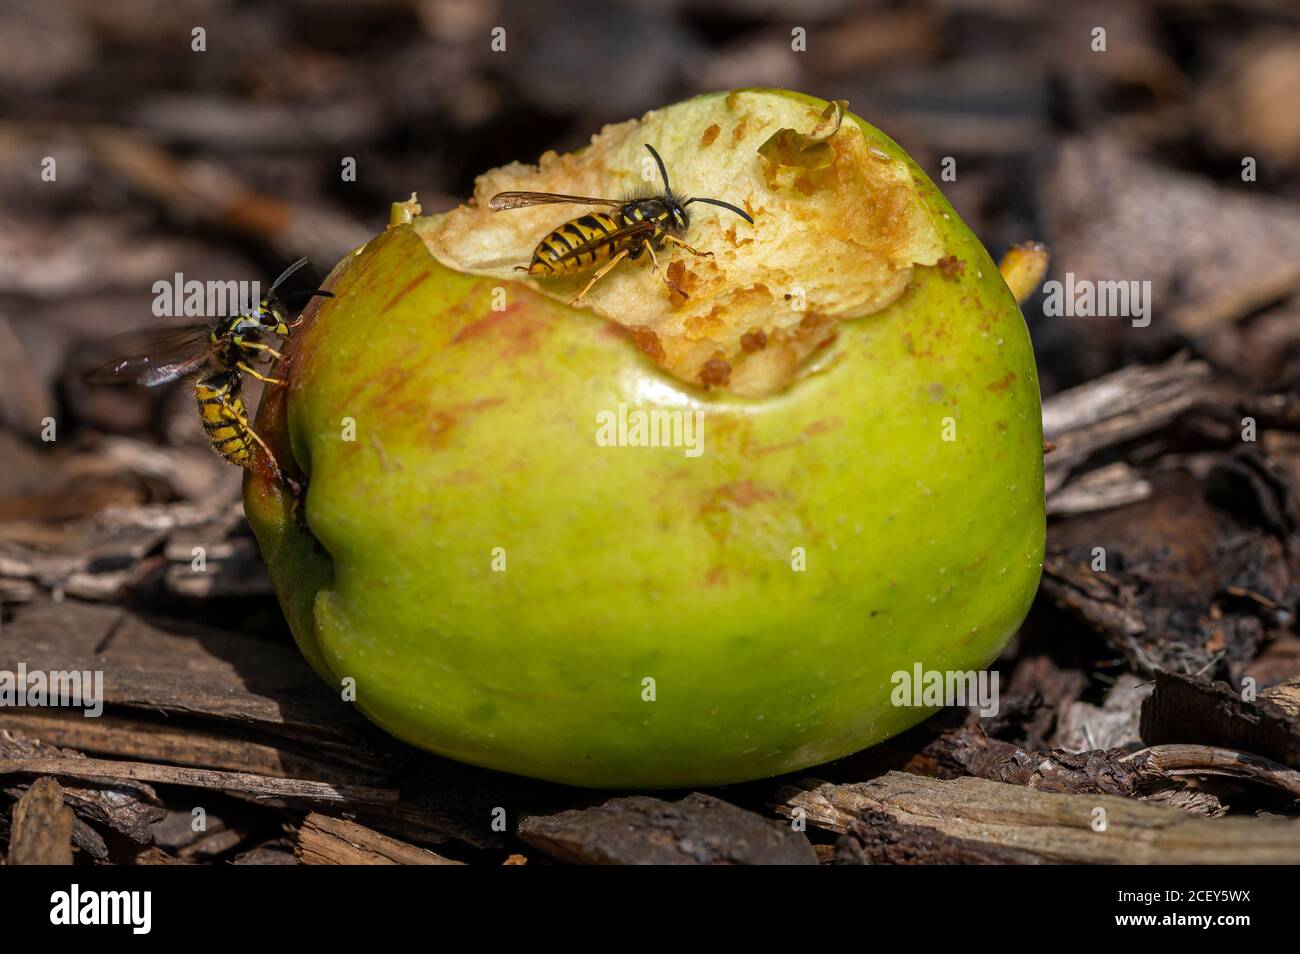 Yellow jacket wasp eating sweet apple that has fallen from the tree and is rotting Stock Photo